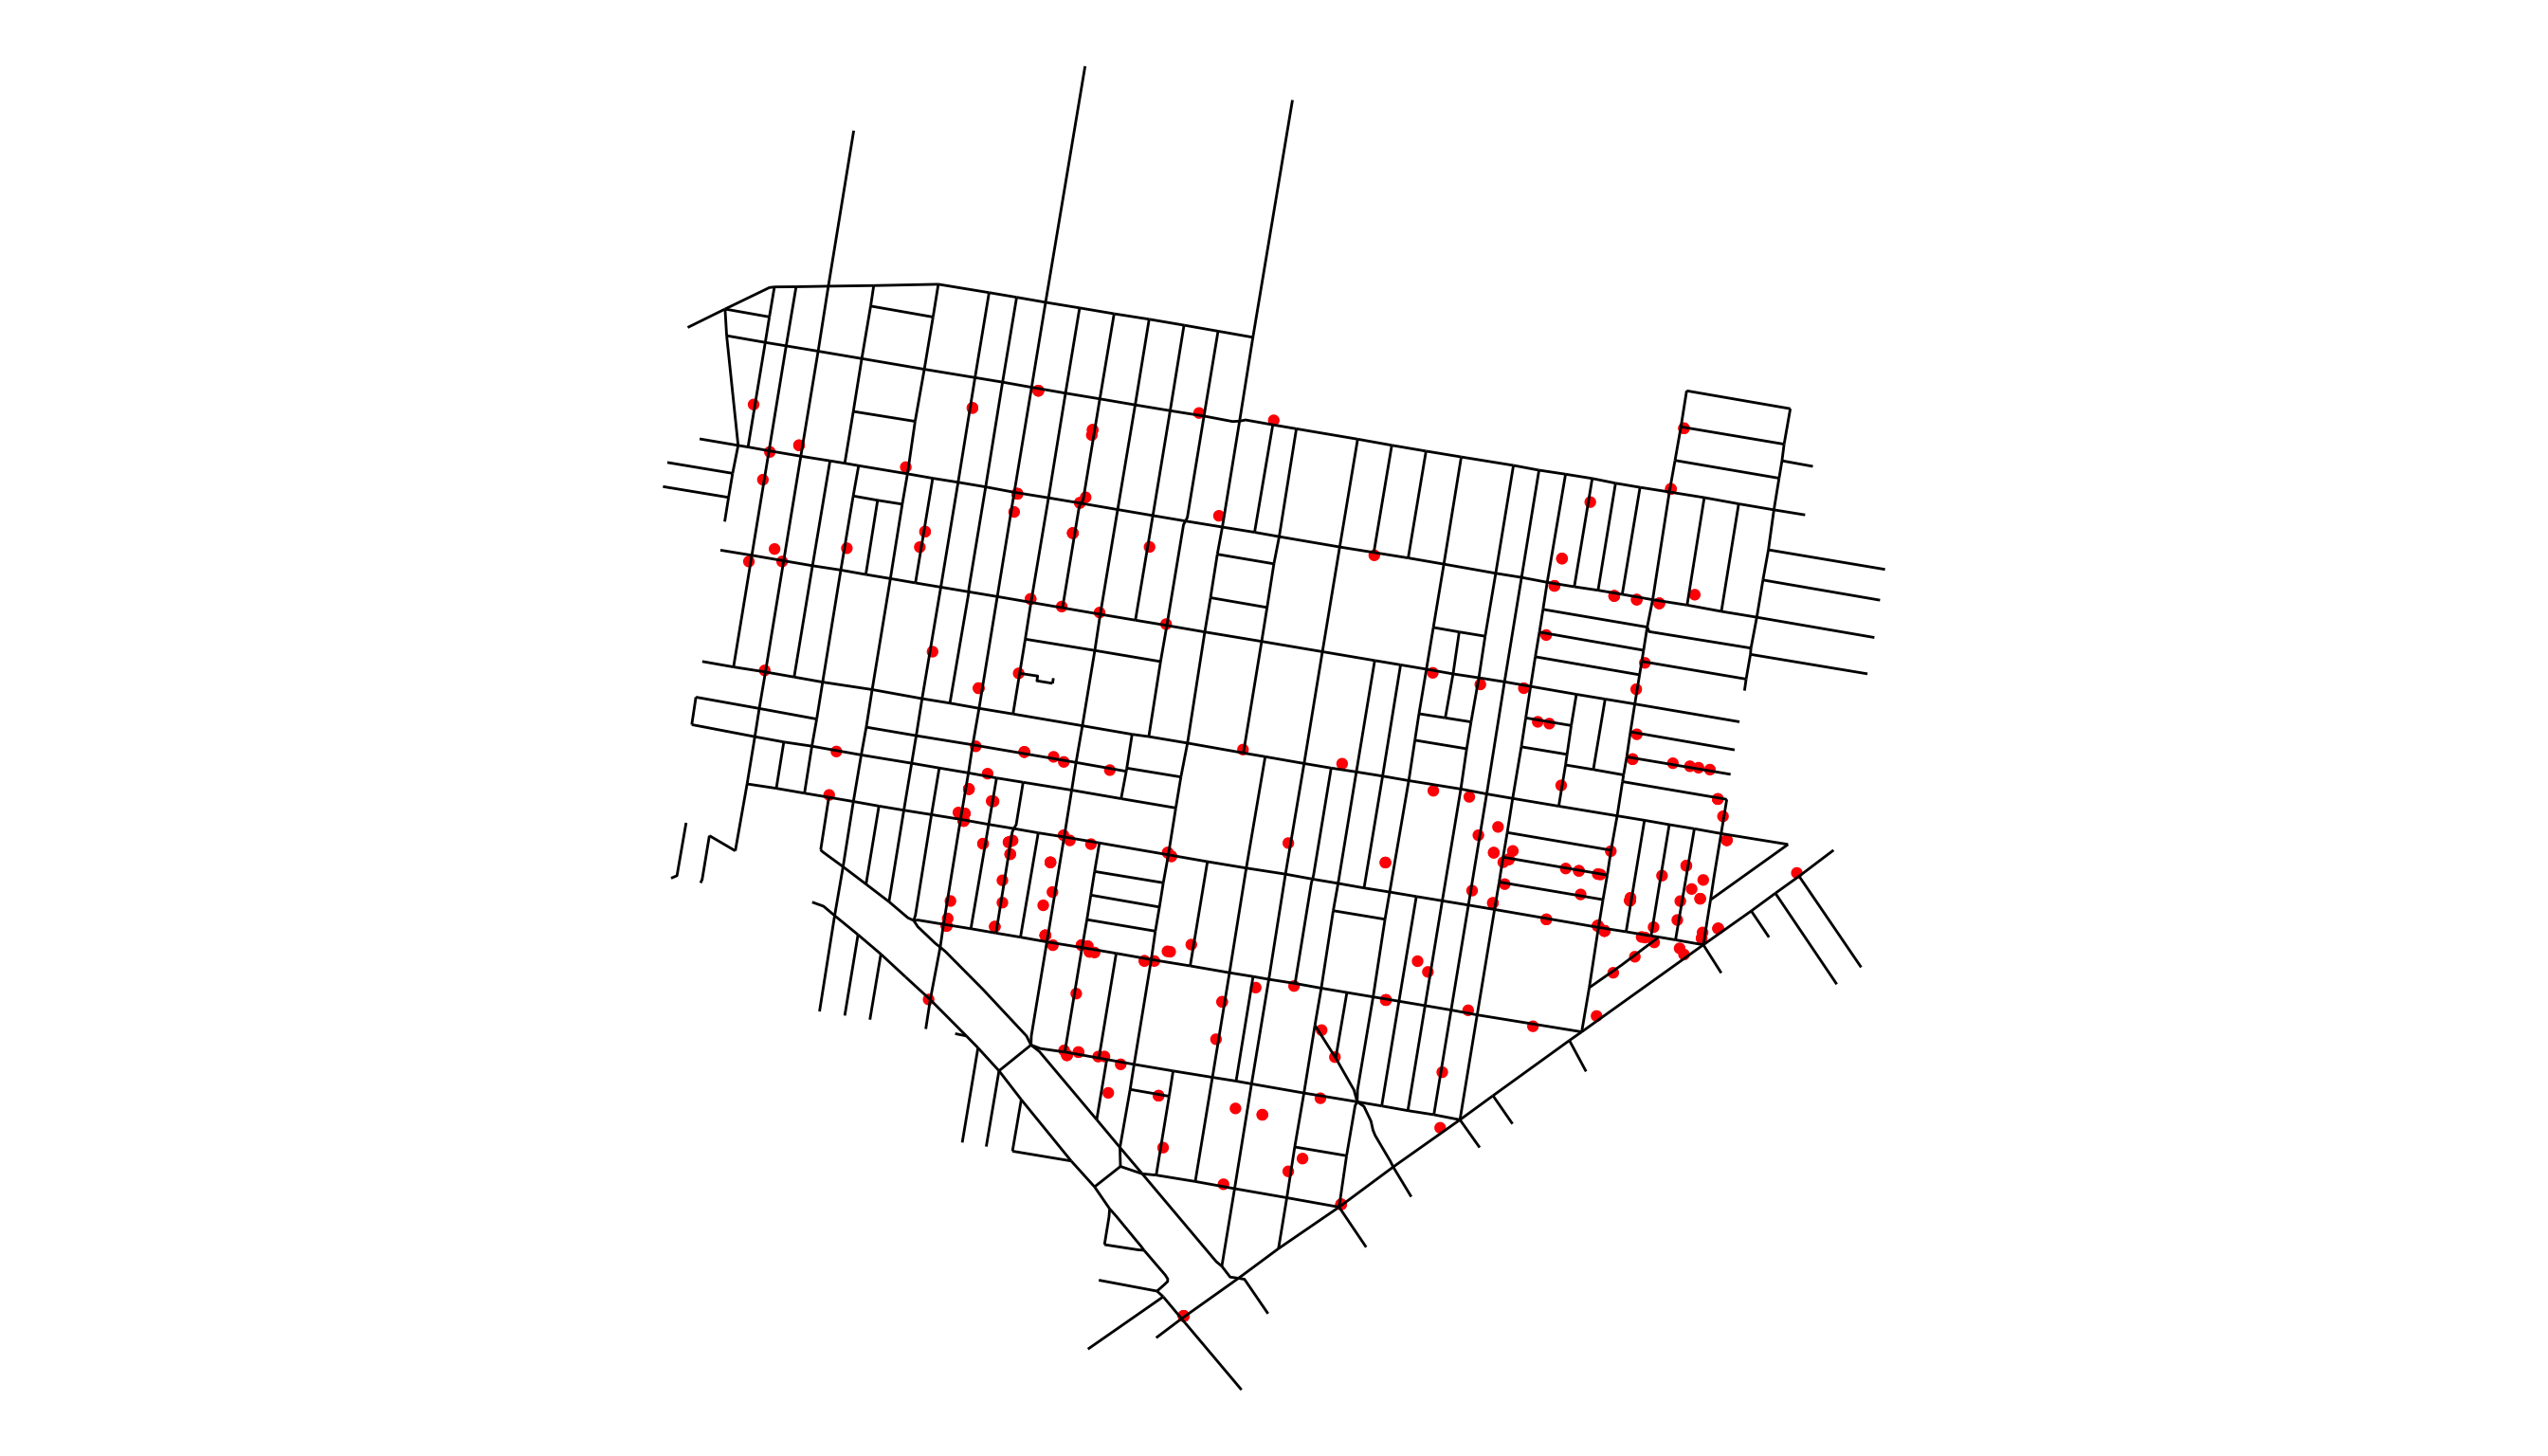 Shootings in the Neighborhood of Upper Kensington during Calendar year 2015. City Street and Crime data are from opendataphilly.org.